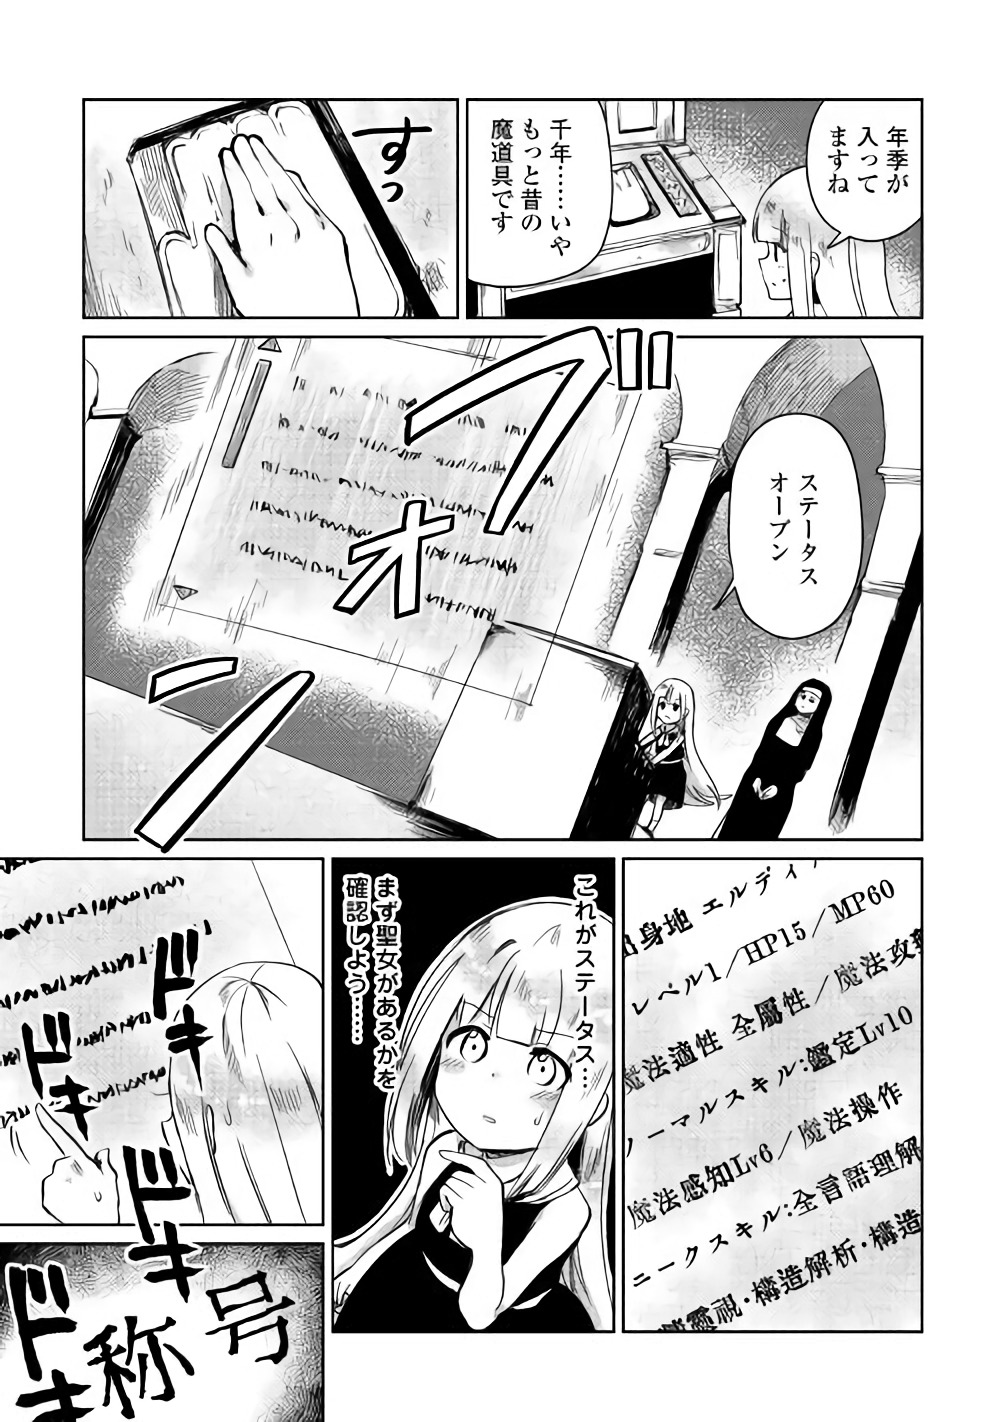 The Former Structural Researcher’s Story of Otherworldly Adventure 第2話 - Page 29